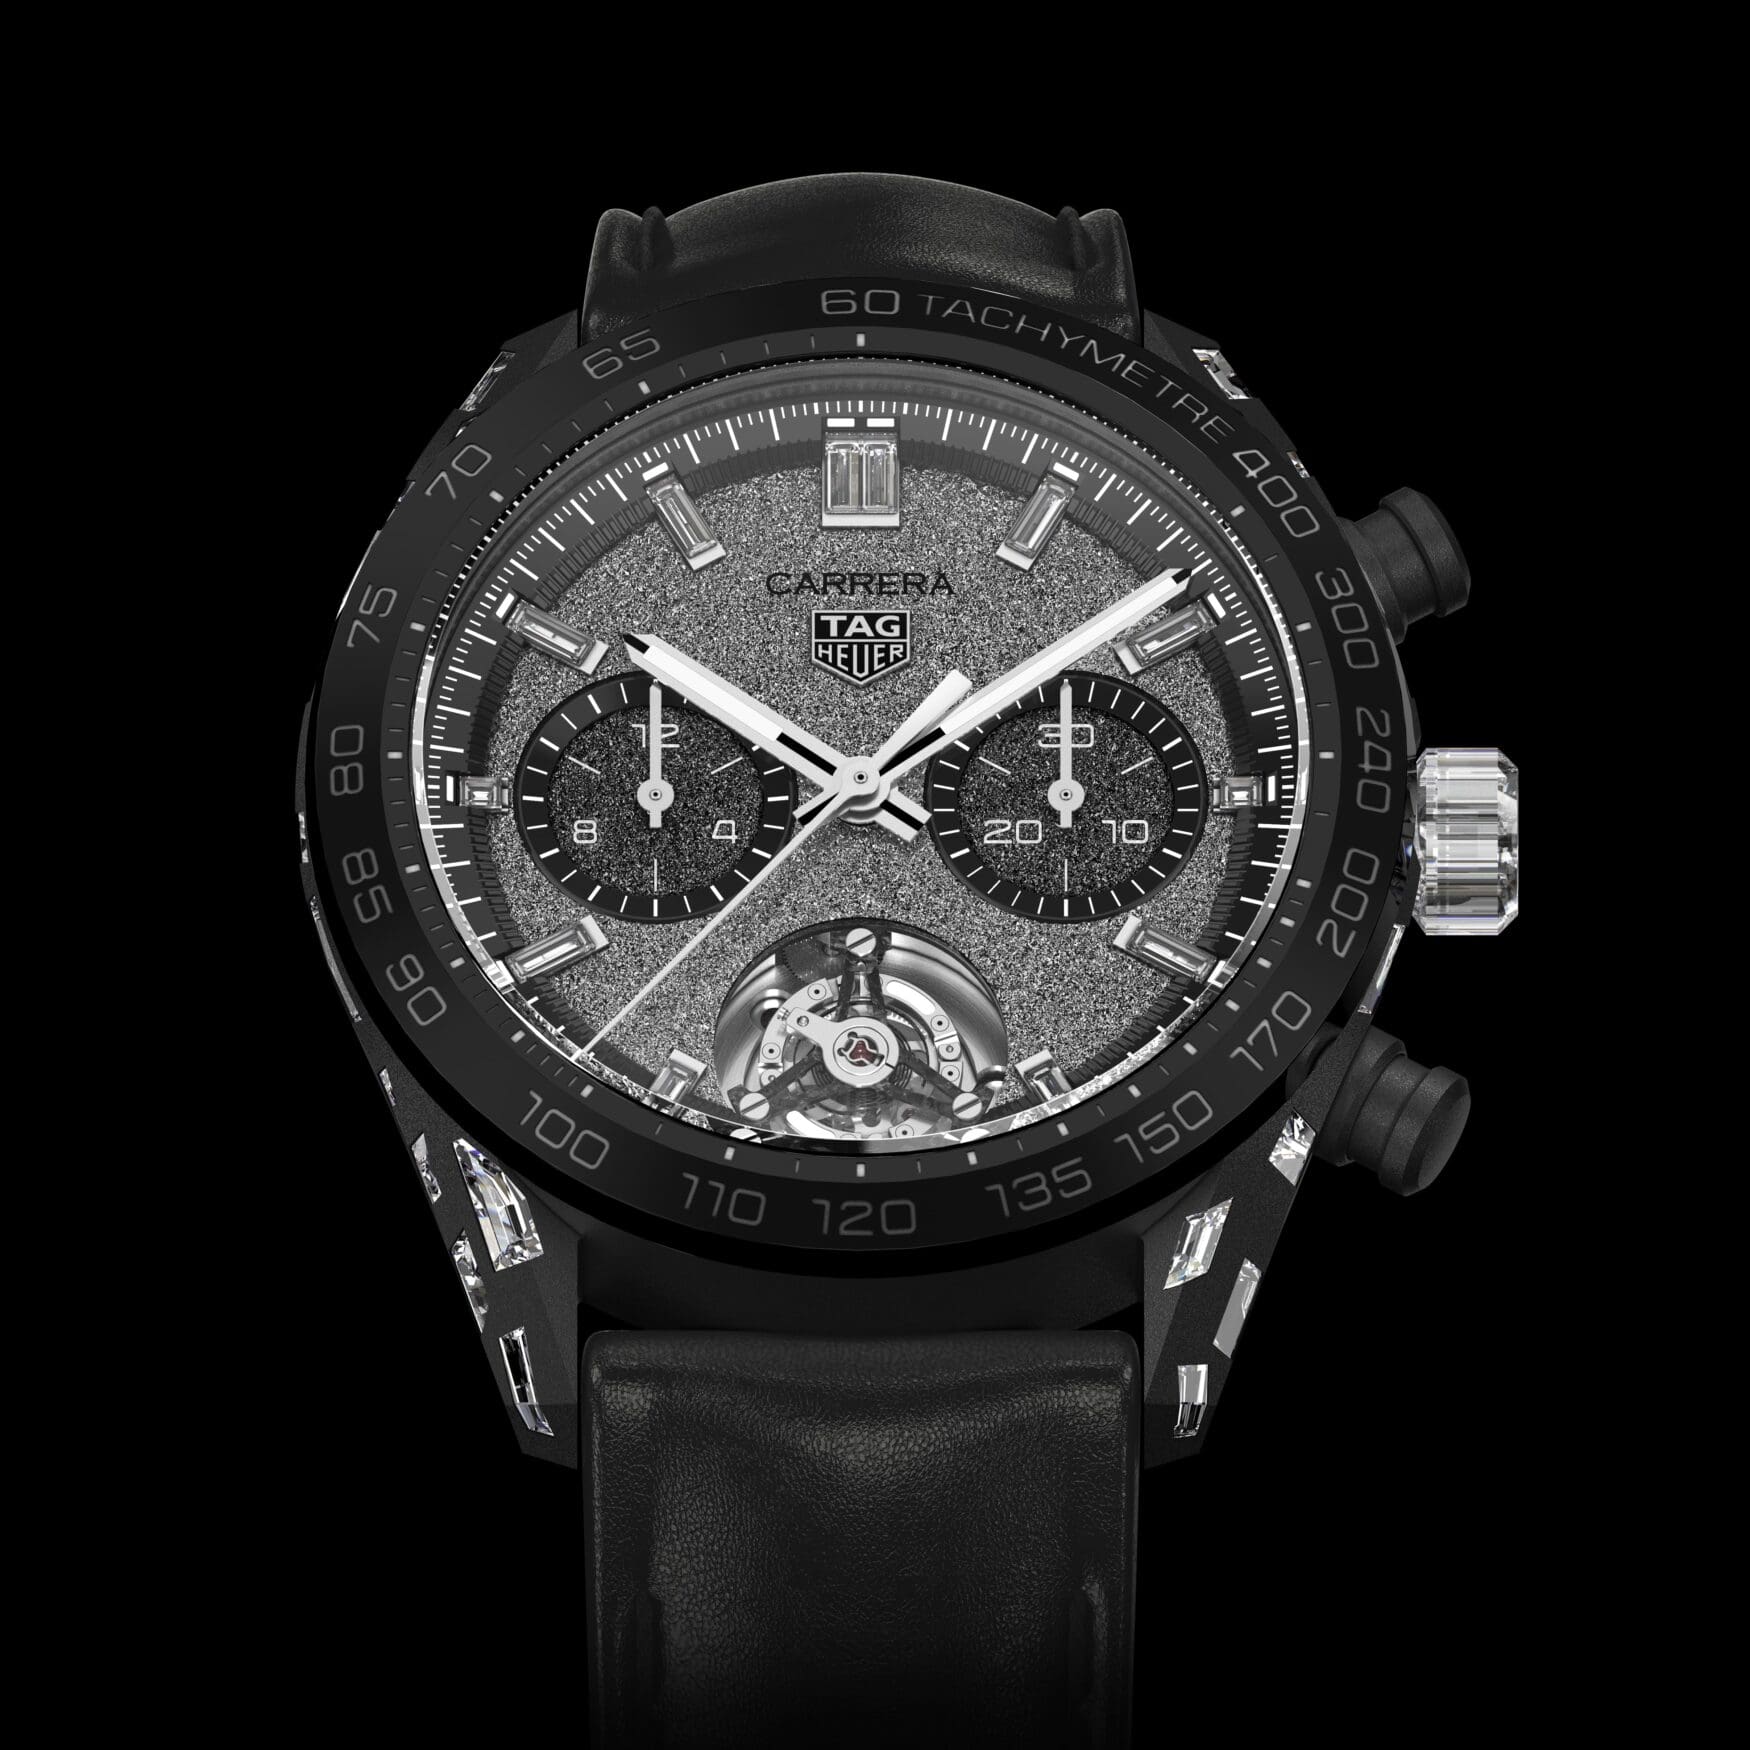 TAG Heuer puts the novel in novelty with new tourbillon chronograph cased in diamond-set aluminum